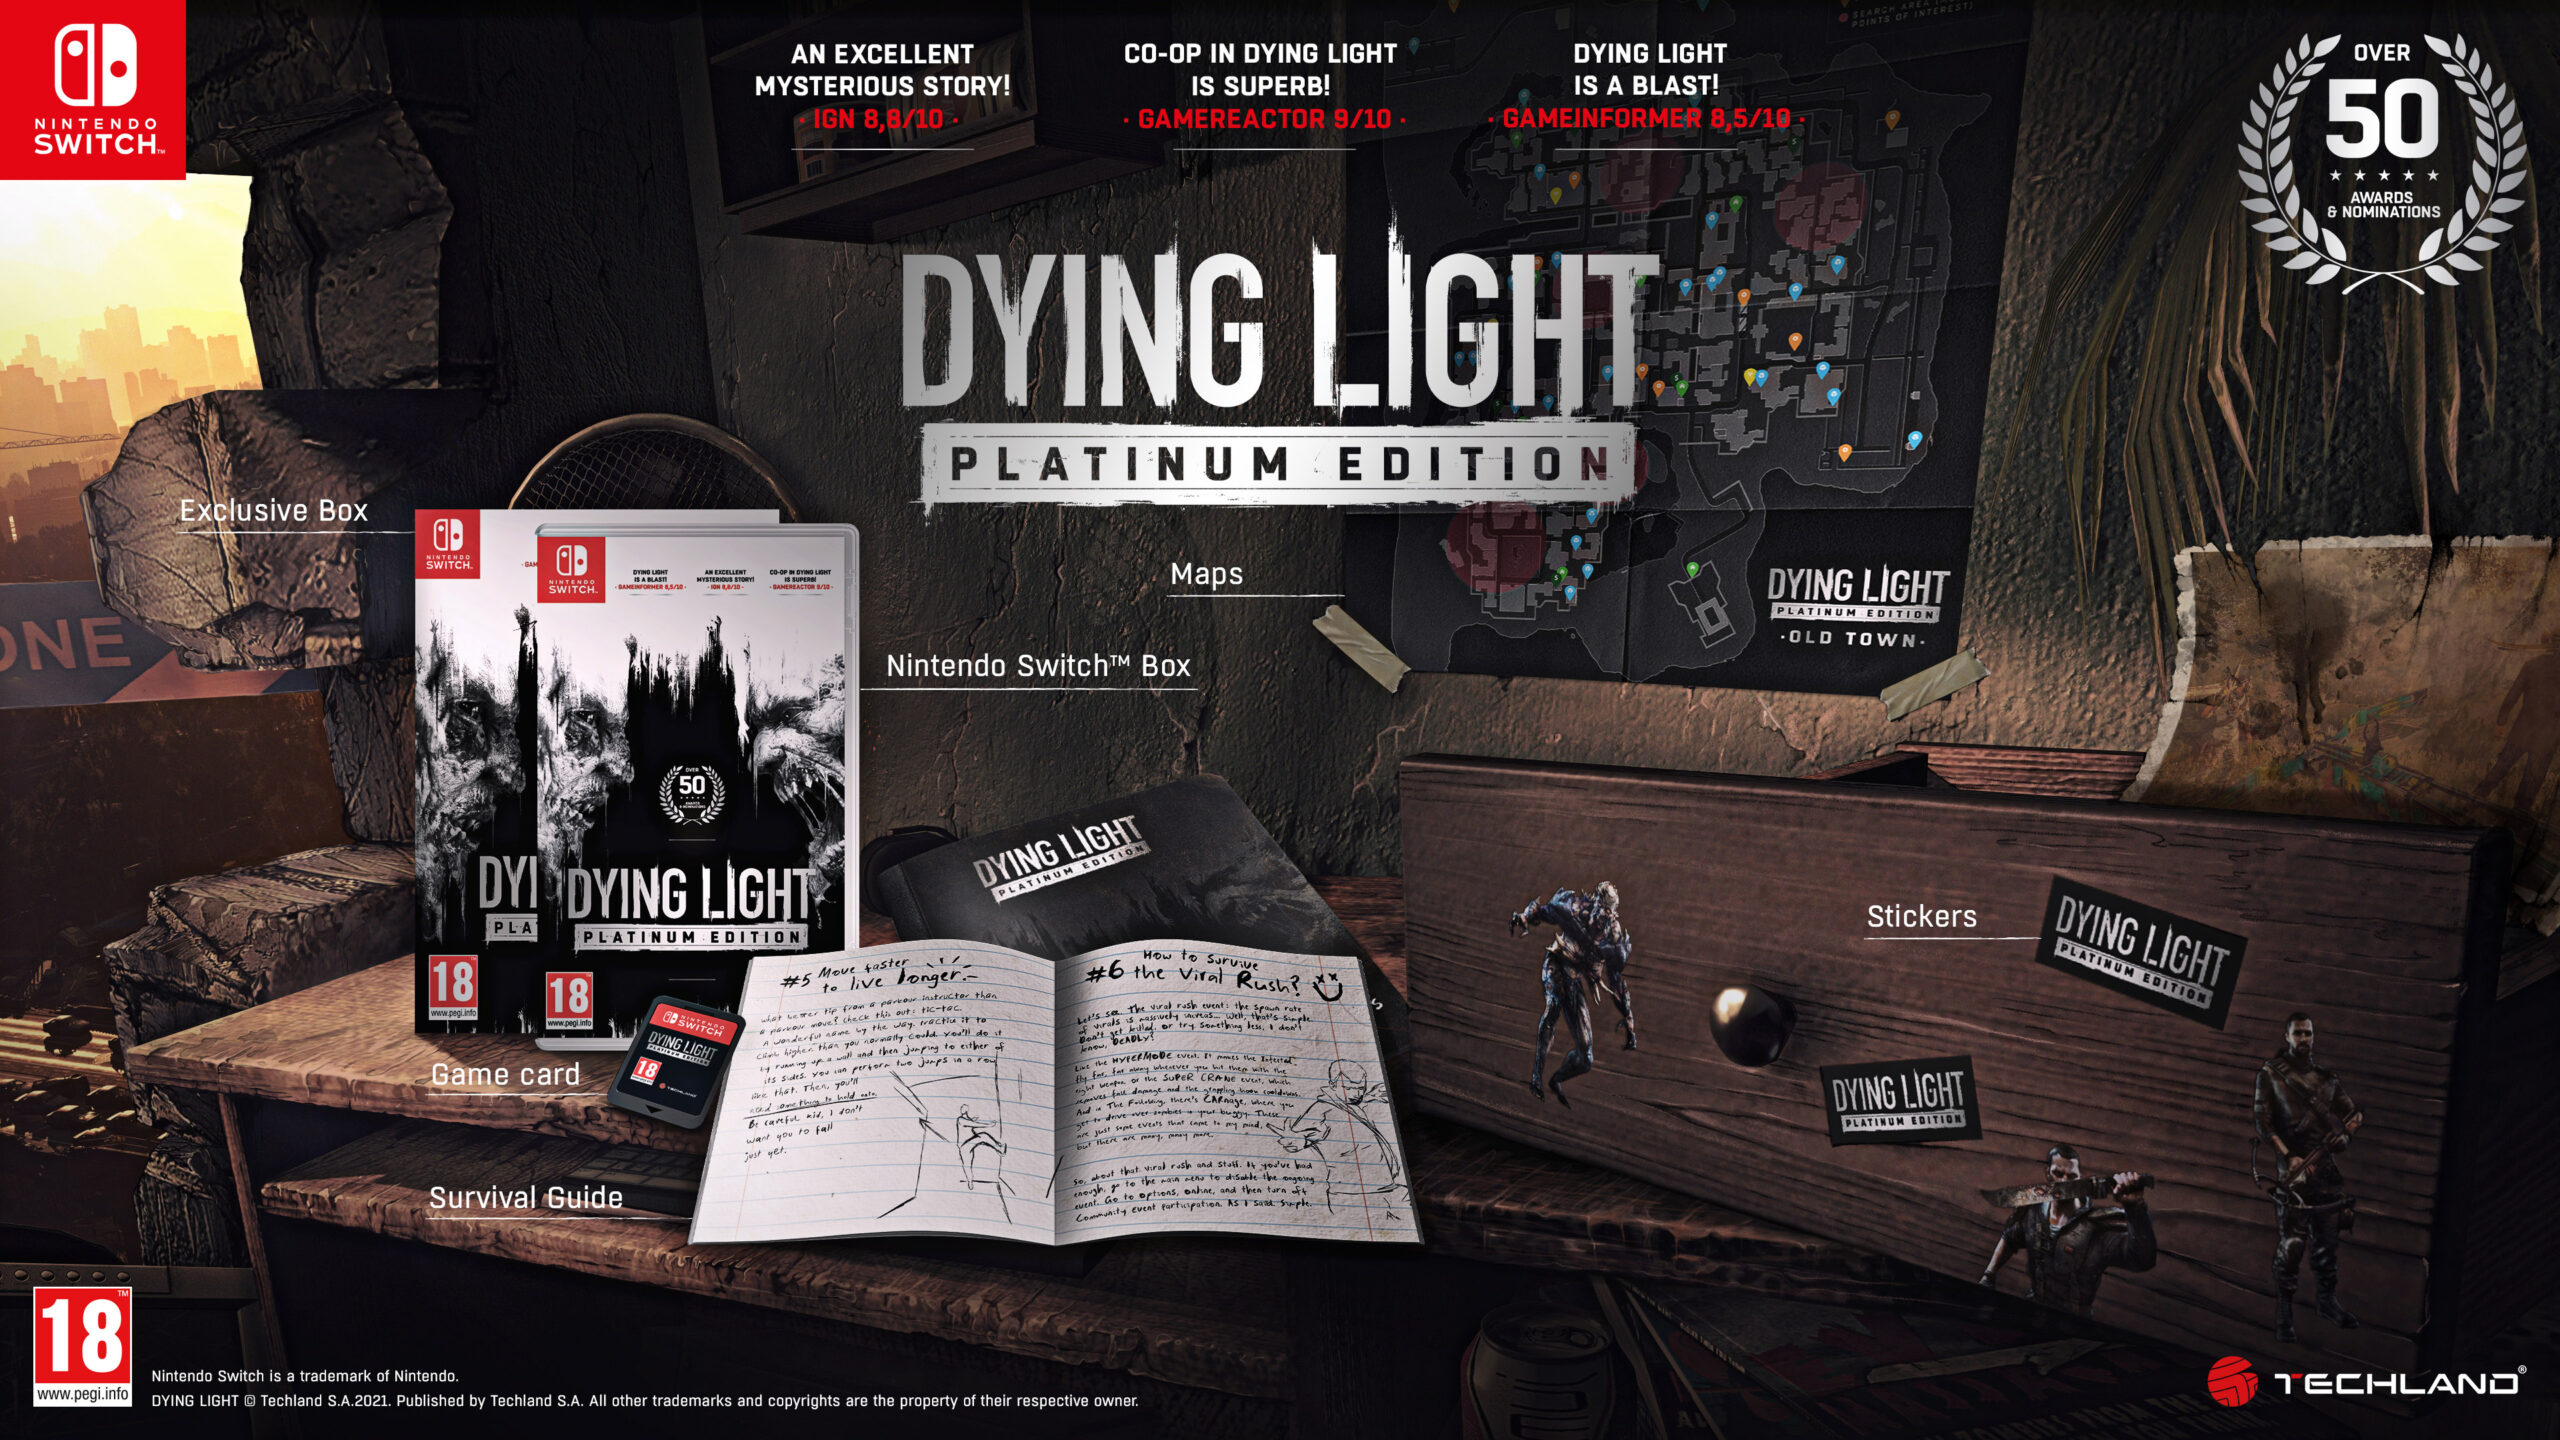 Dying-Light-Switch_08-26-21-scaled.jpg